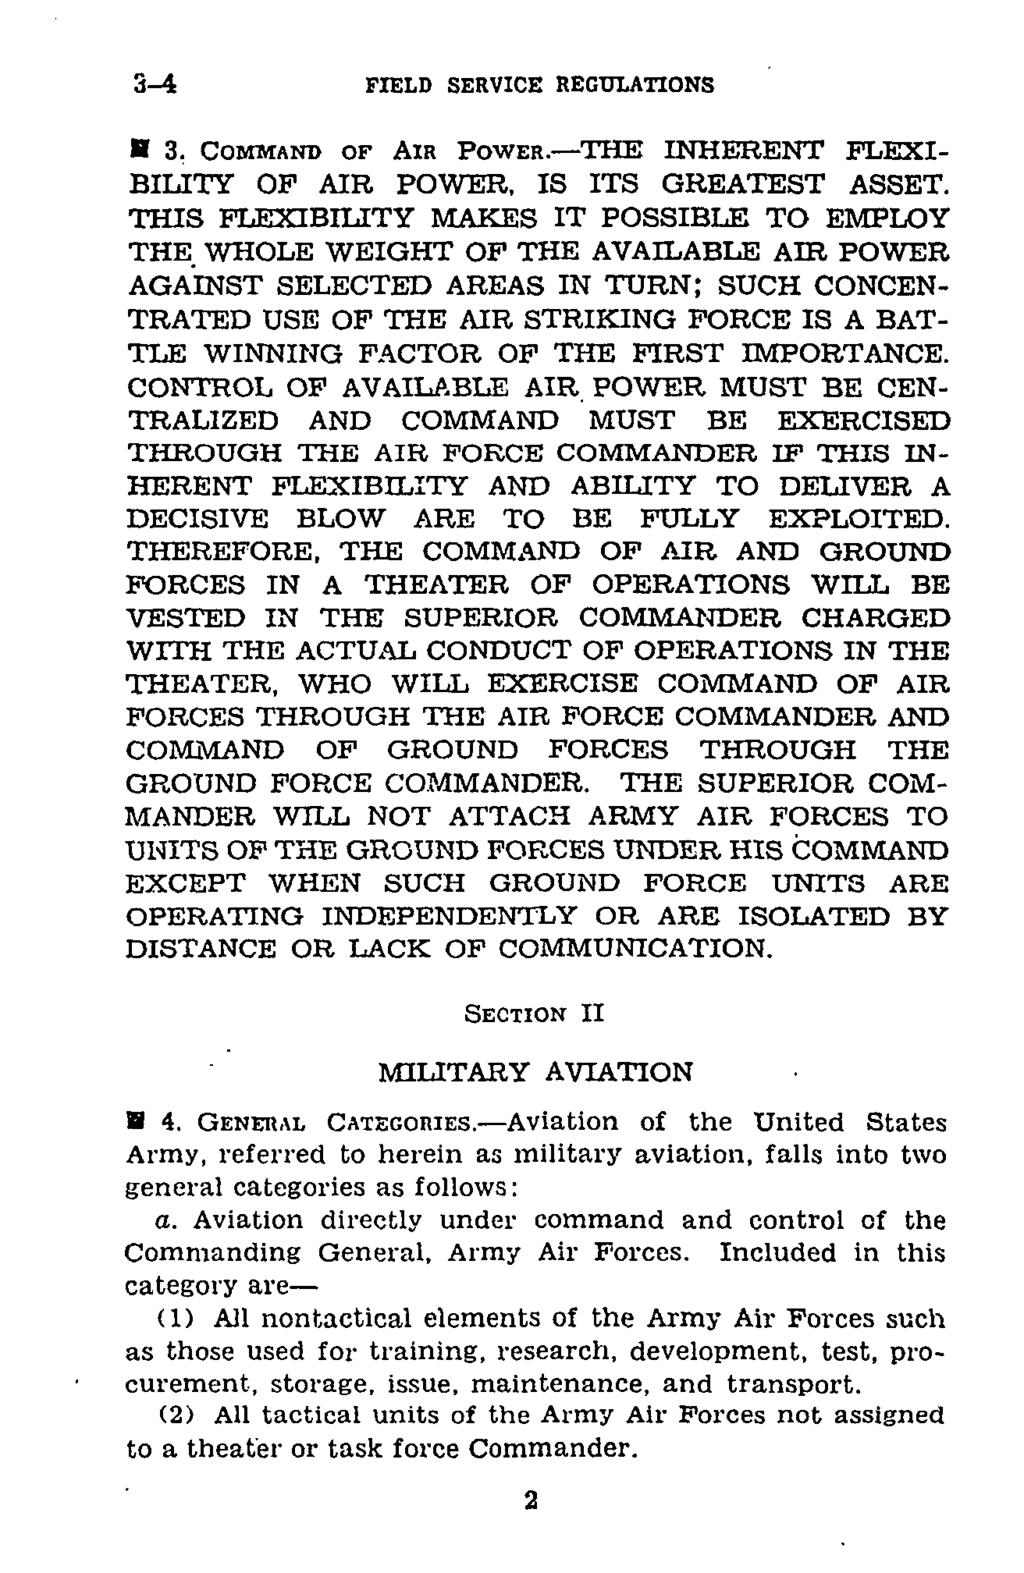 3-4 FIELD SERVICE REGULATIONS I 3. COMMAND OF AIR POWER.-THE INHERENT FLEXI- BILITY OF AIR POWER, IS ITS GREATEST ASSET.